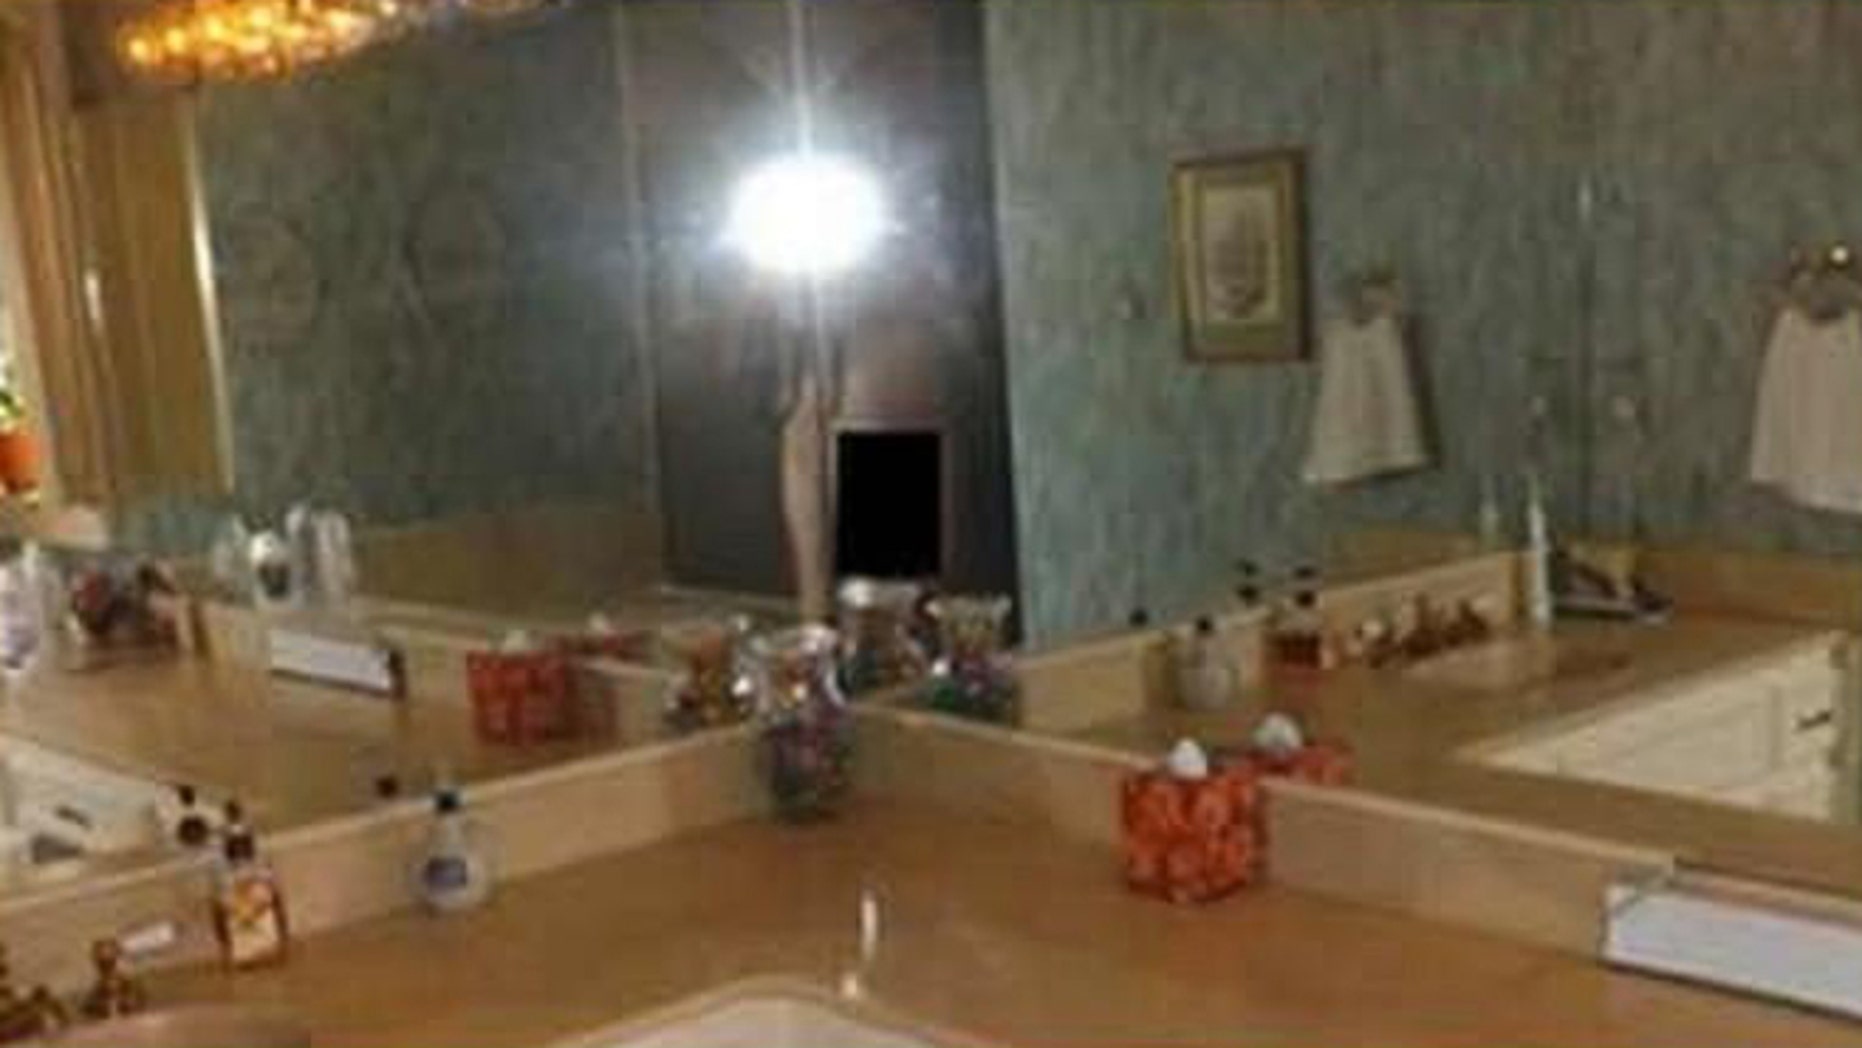 Oops Man Selling His Home Mistakenly Posts Bathroom Pic With Himself